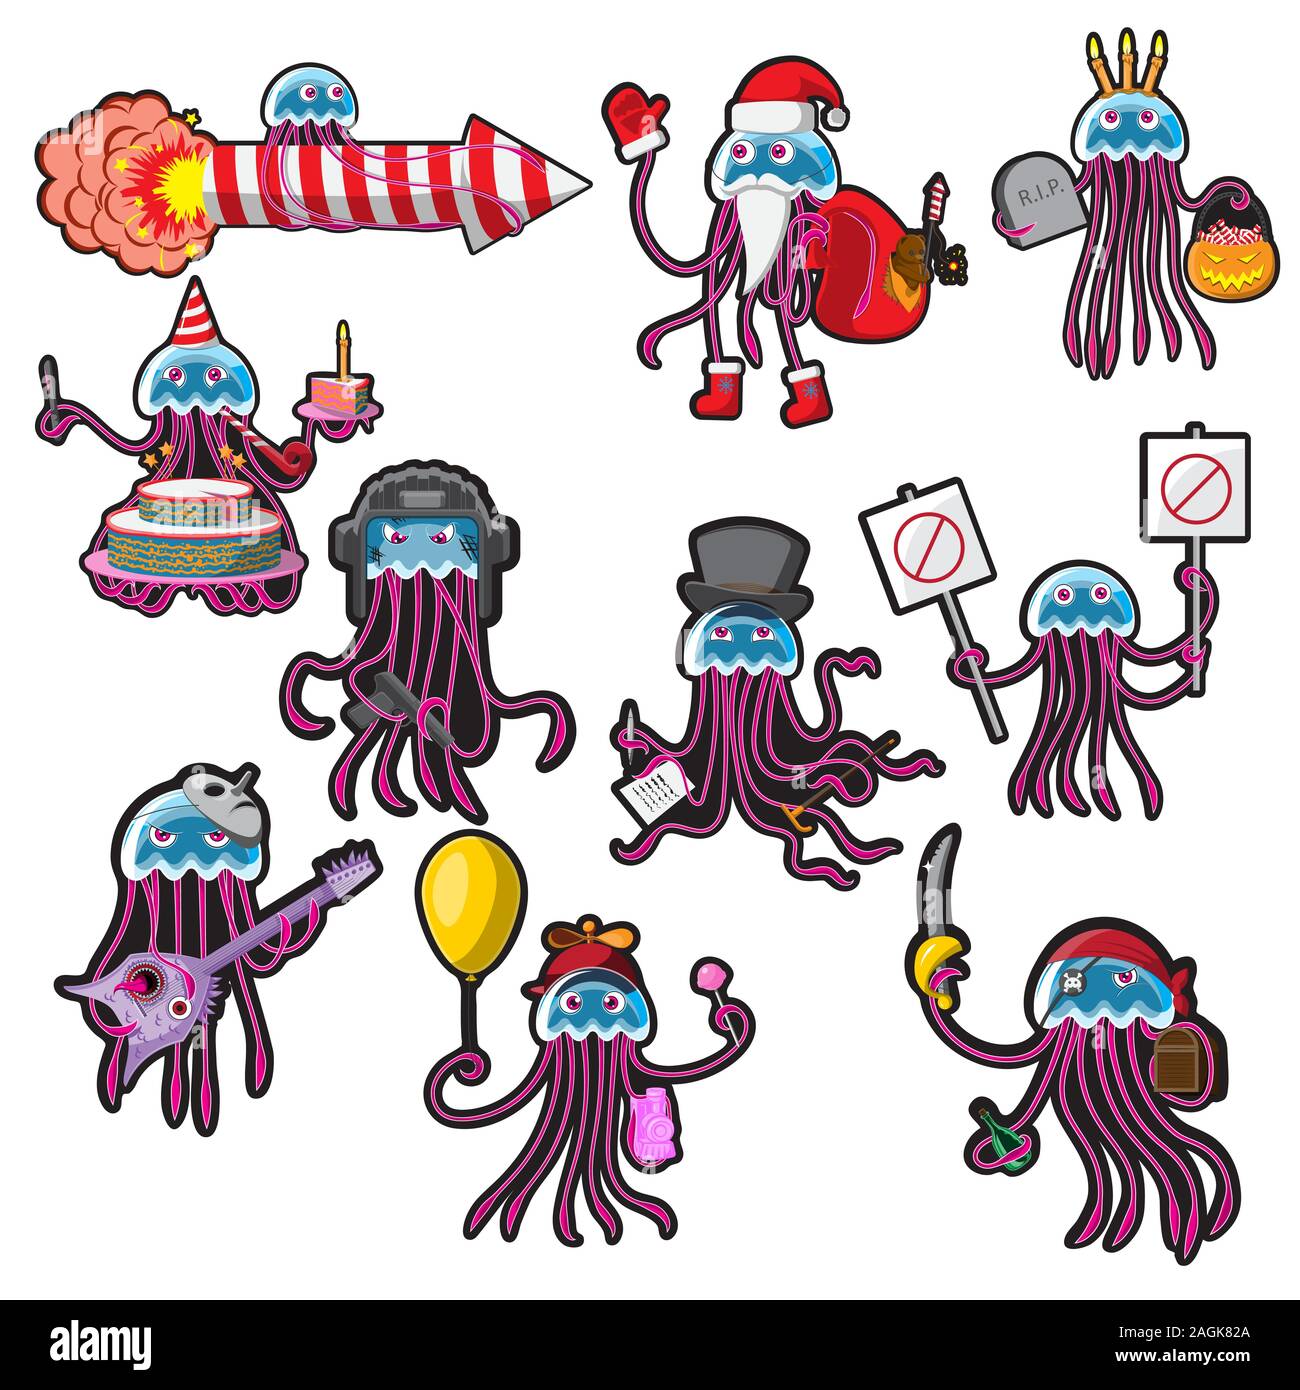 The set of characters of the cartoon jellyfish isolated on a white background. Vector image Stock Vector